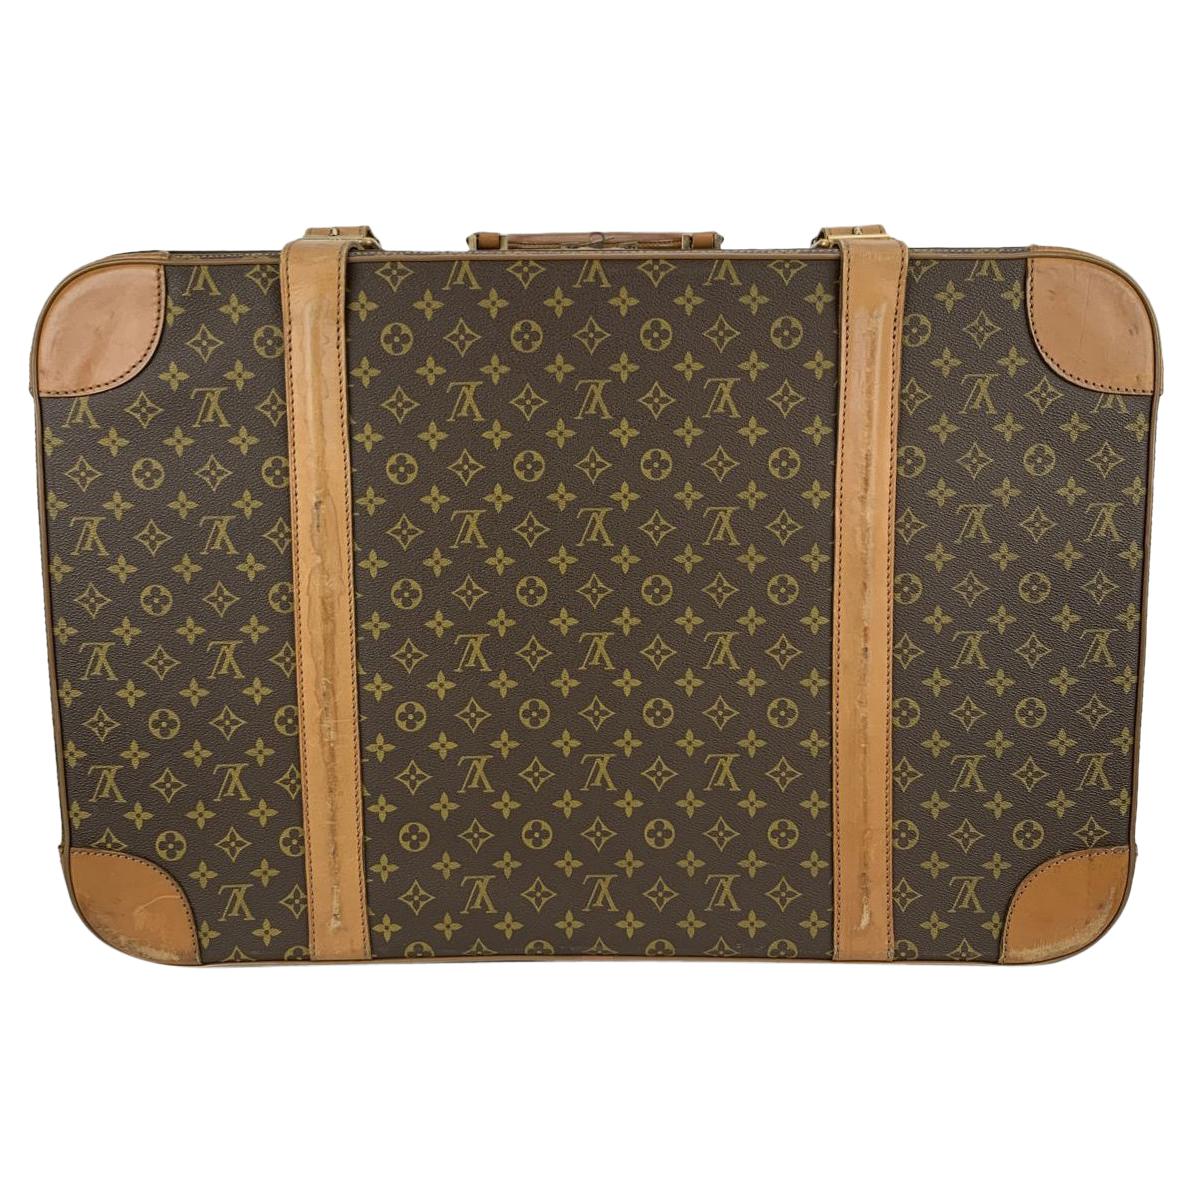 Two Louis Vuitton Stratos 60 Luggage Cases Auction